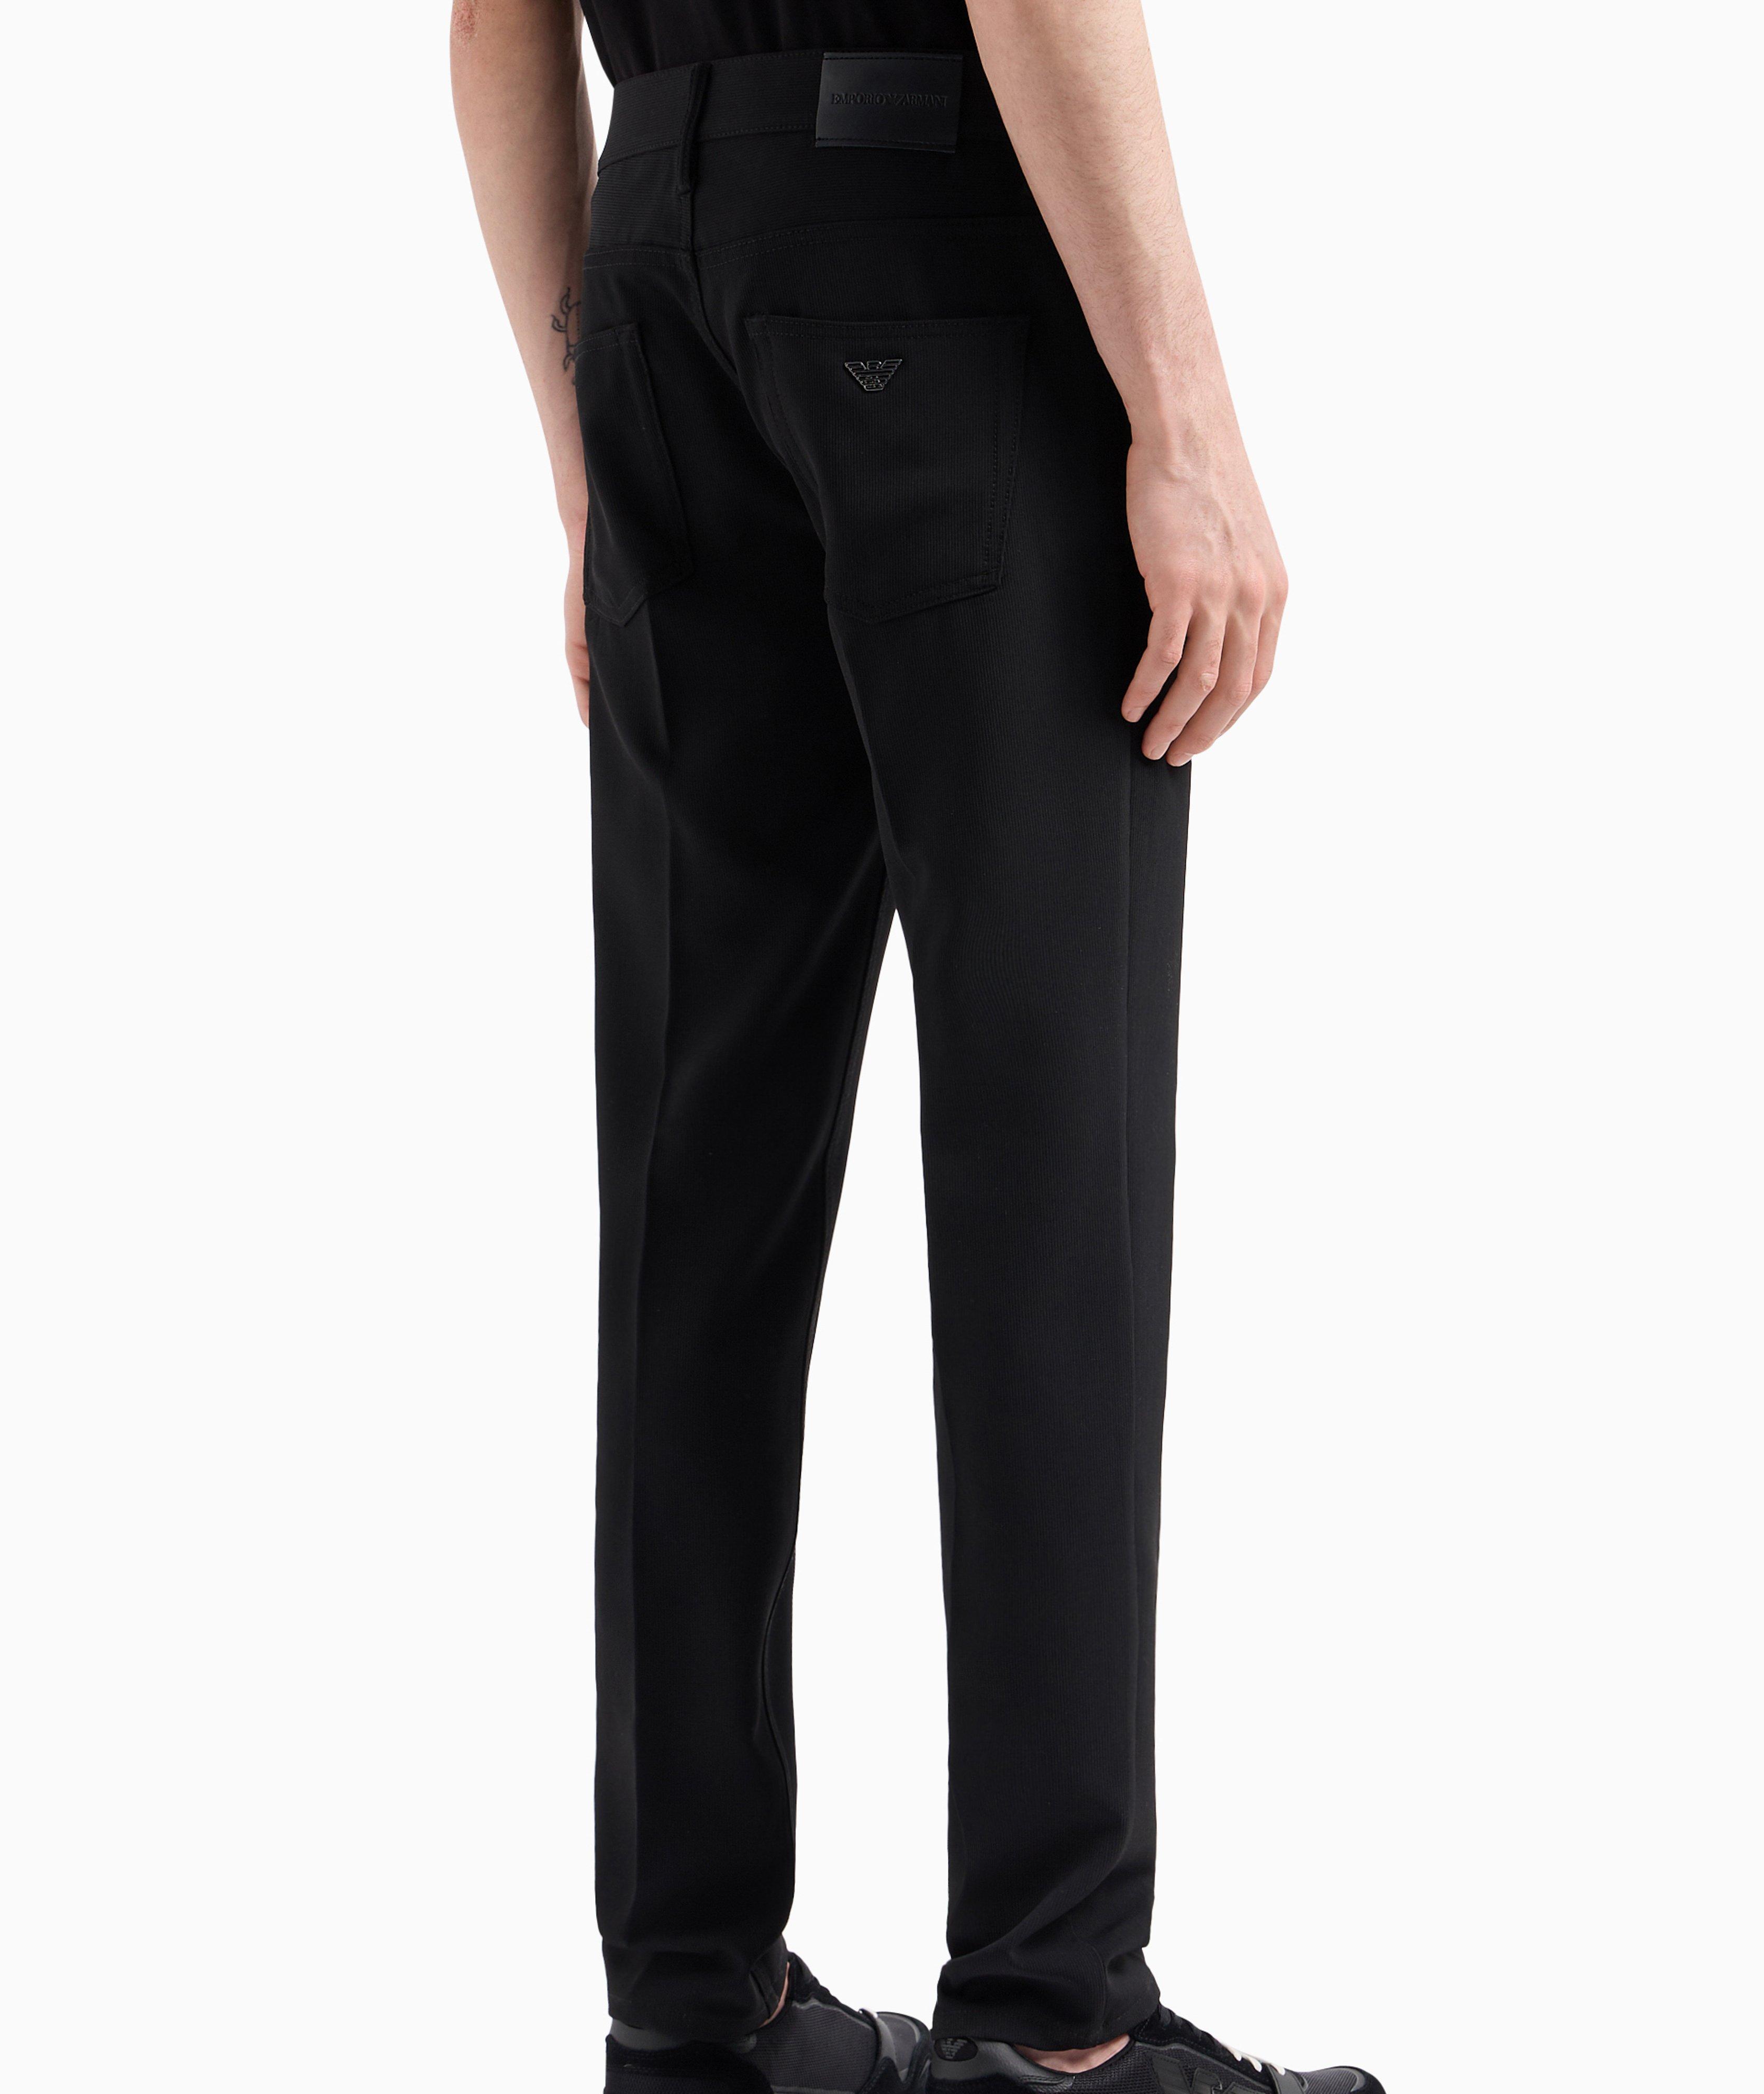 5-Pocket Technical-Blend Trousers image 2